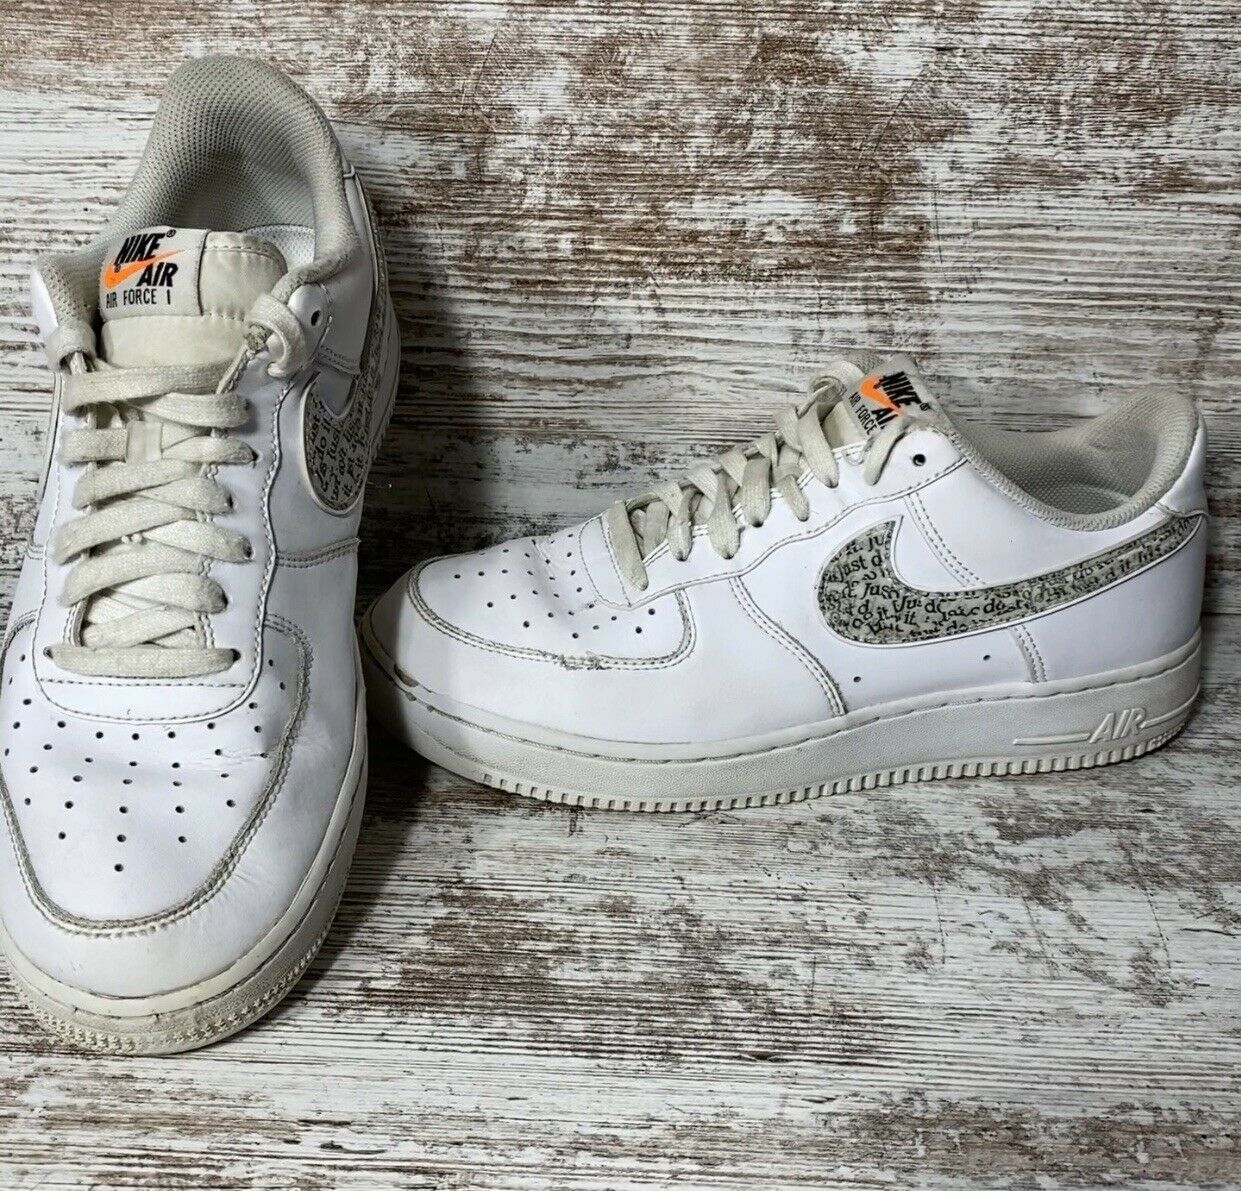 Nike Air Force 1 Sneaker Shoes Just Do It 2018 White BQ5361-100 Mens Size 8.5